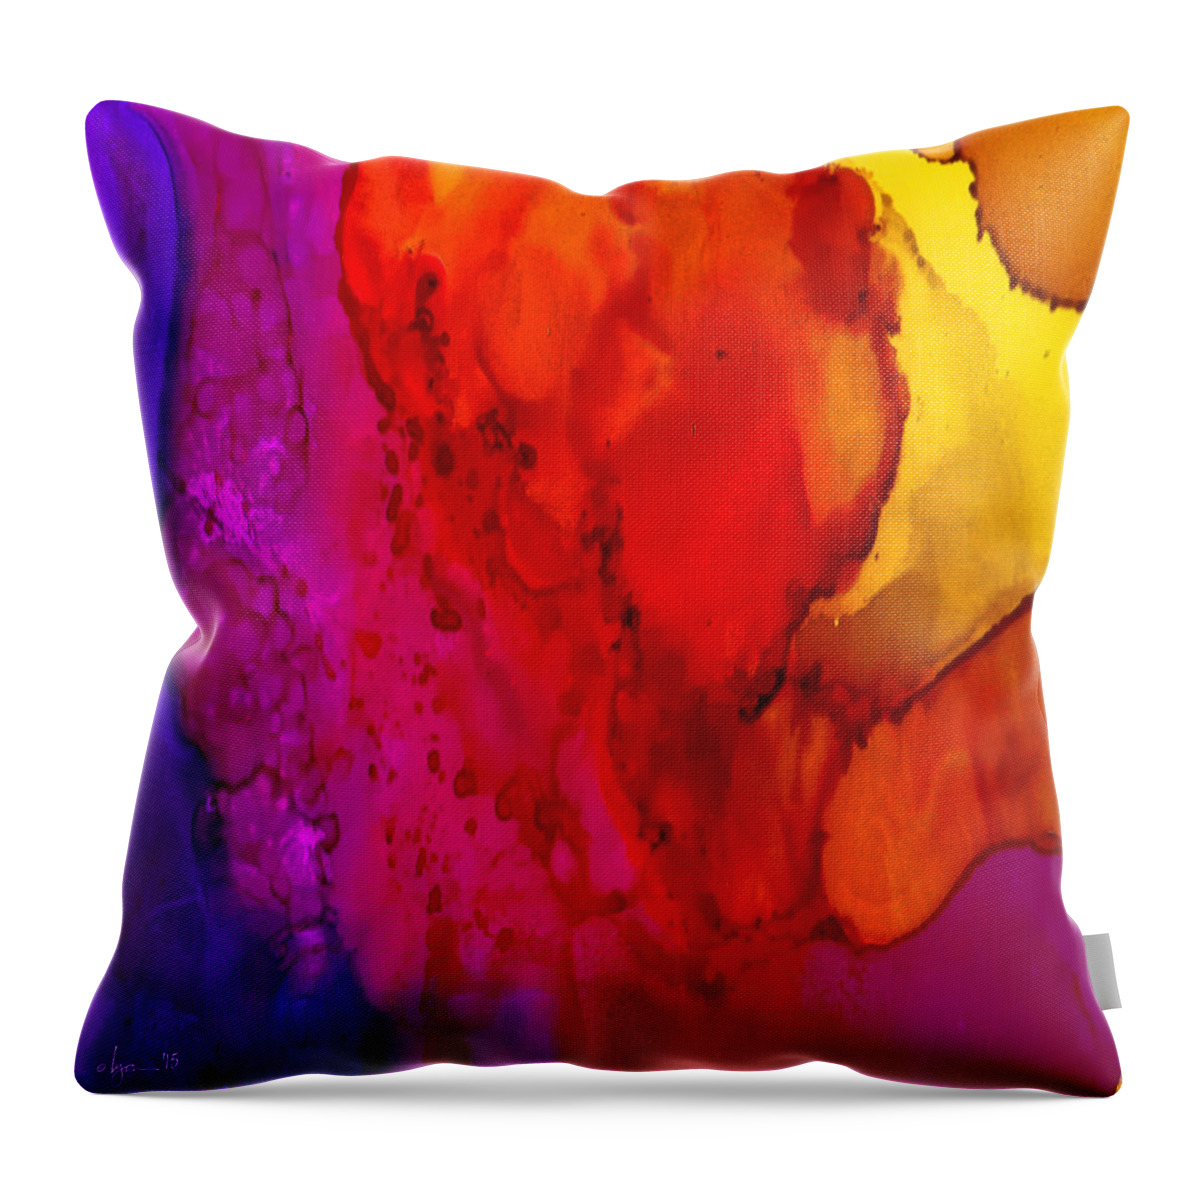 Tropical Throw Pillow featuring the painting Desert by Angela Treat Lyon